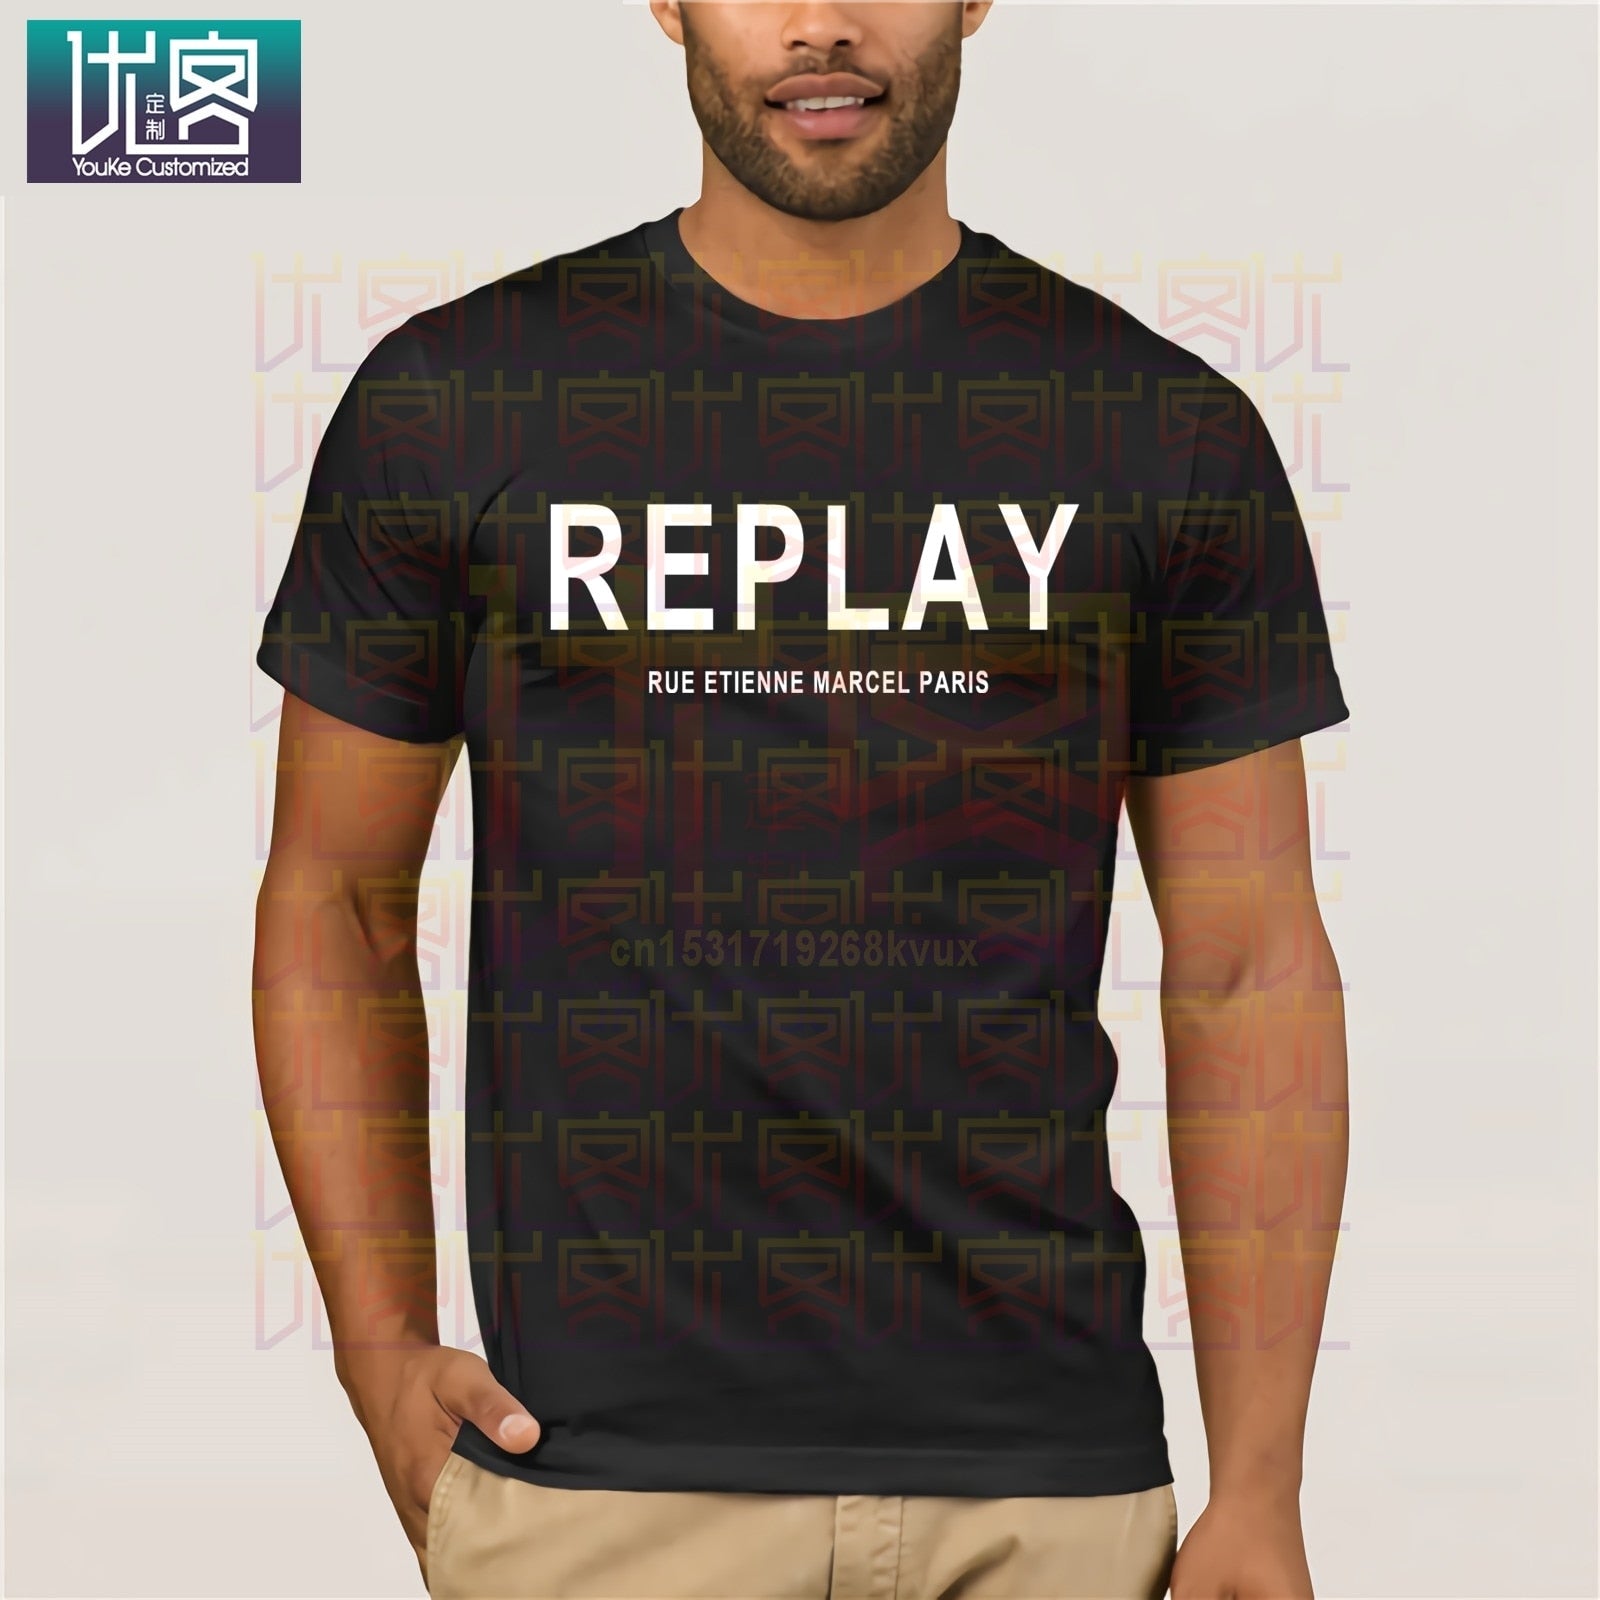 Men's T-Shirts - Replay Official Store